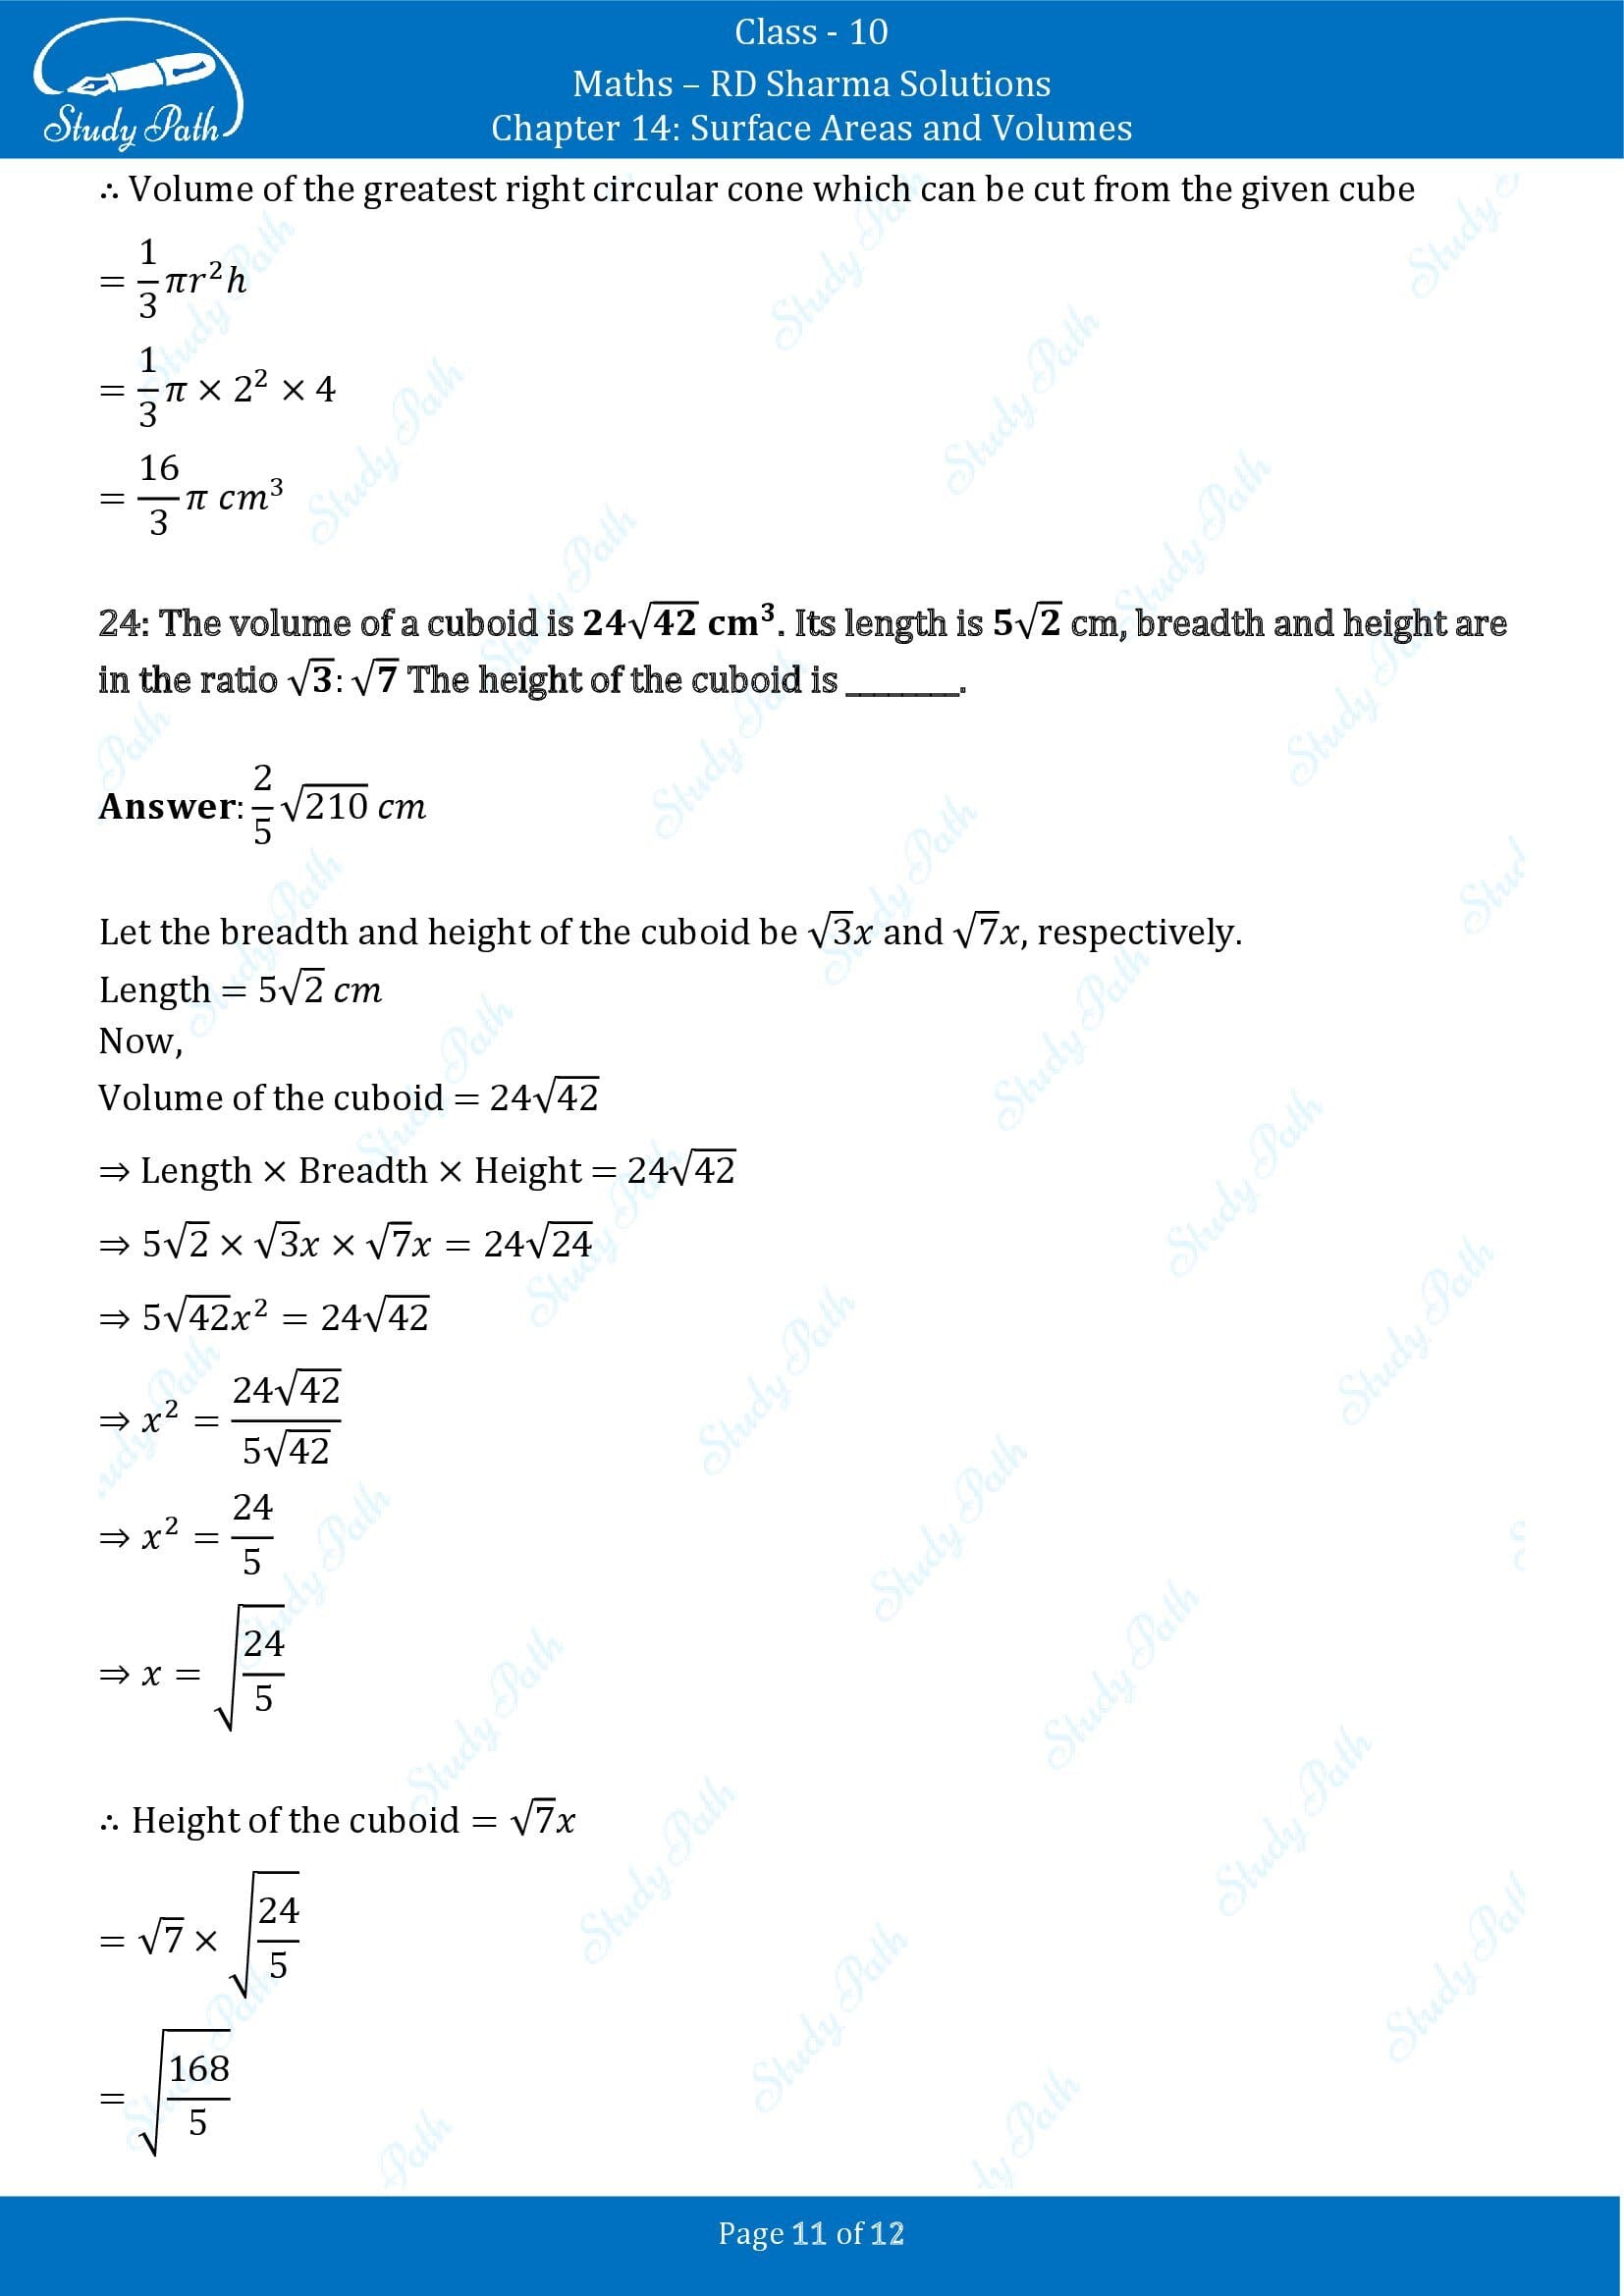 RD Sharma Solutions Class 10 Chapter 14 Surface Areas and Volumes Fill in the Blank Type Questions FBQs 00011